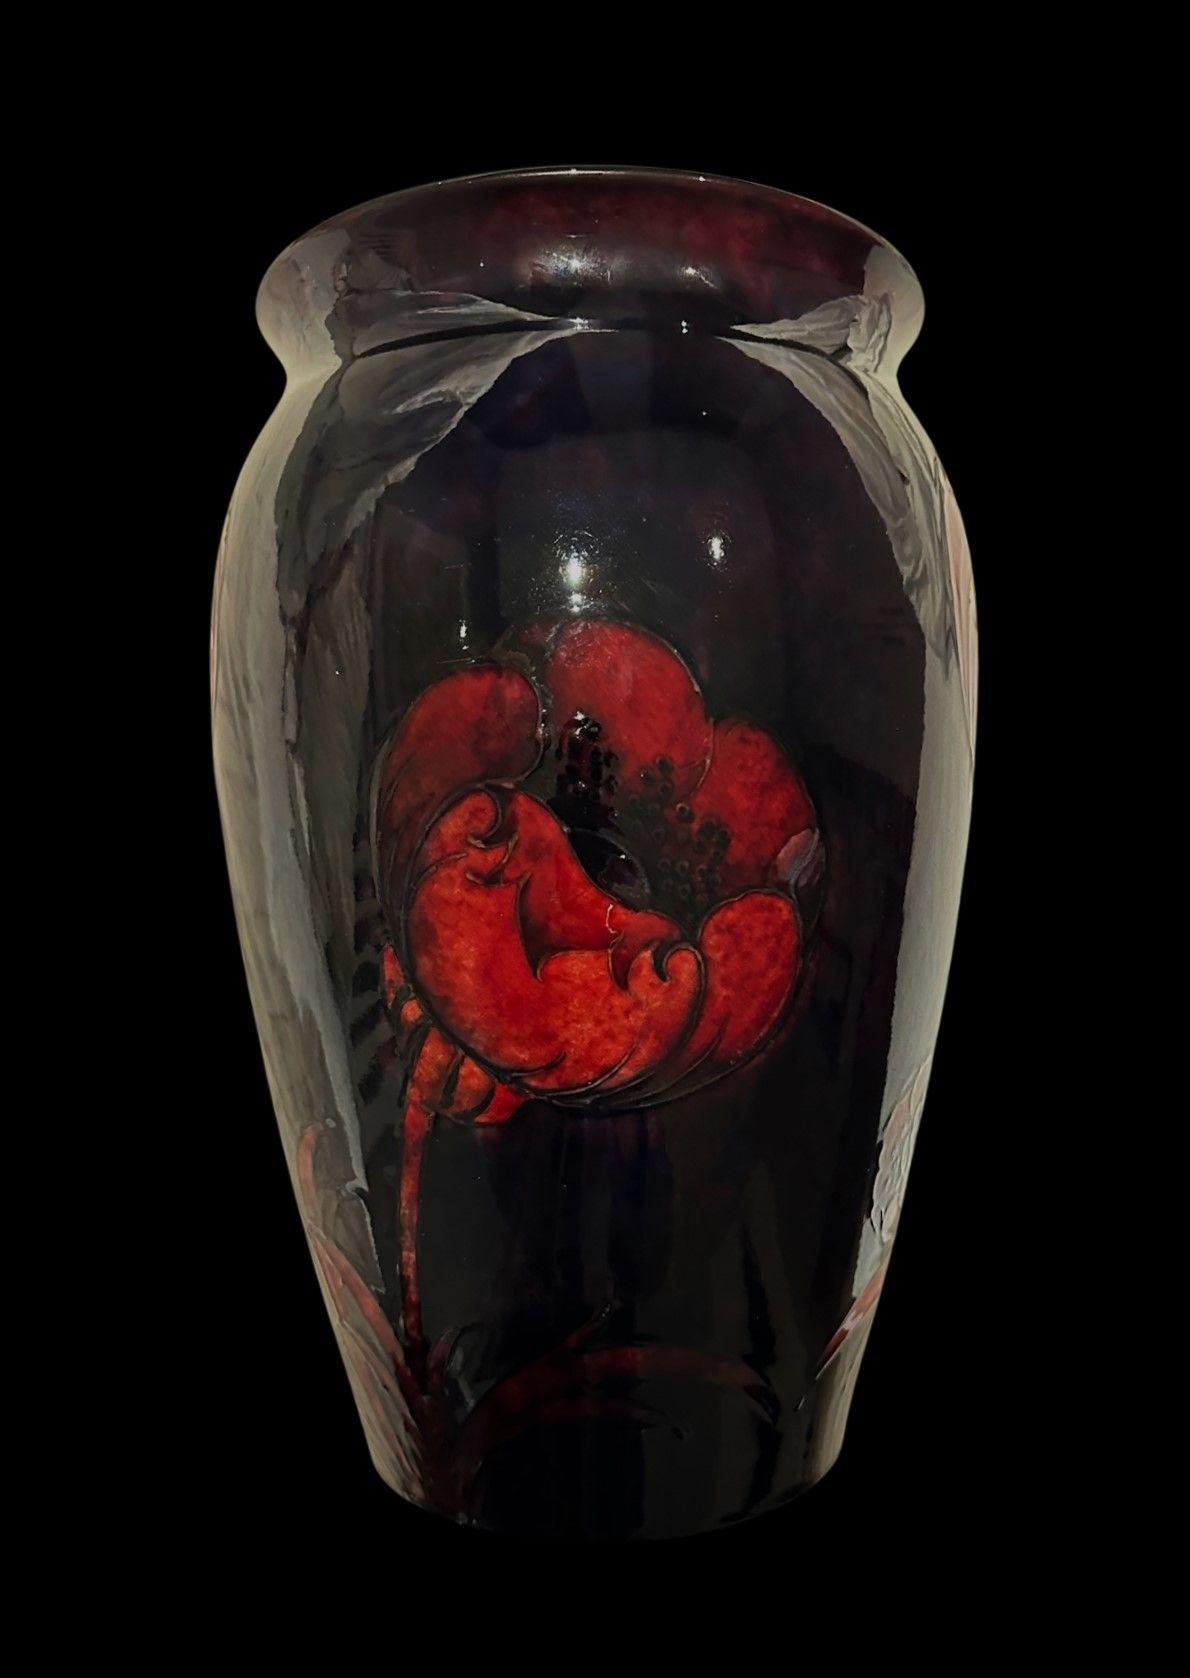 5458
William Moorcroft, a Large, Impressive, yet understated Vase decorated with 5 “Big Poppies” in a Rich Flambe Glaze
31cm high, 20 cm wide
Circa 1925